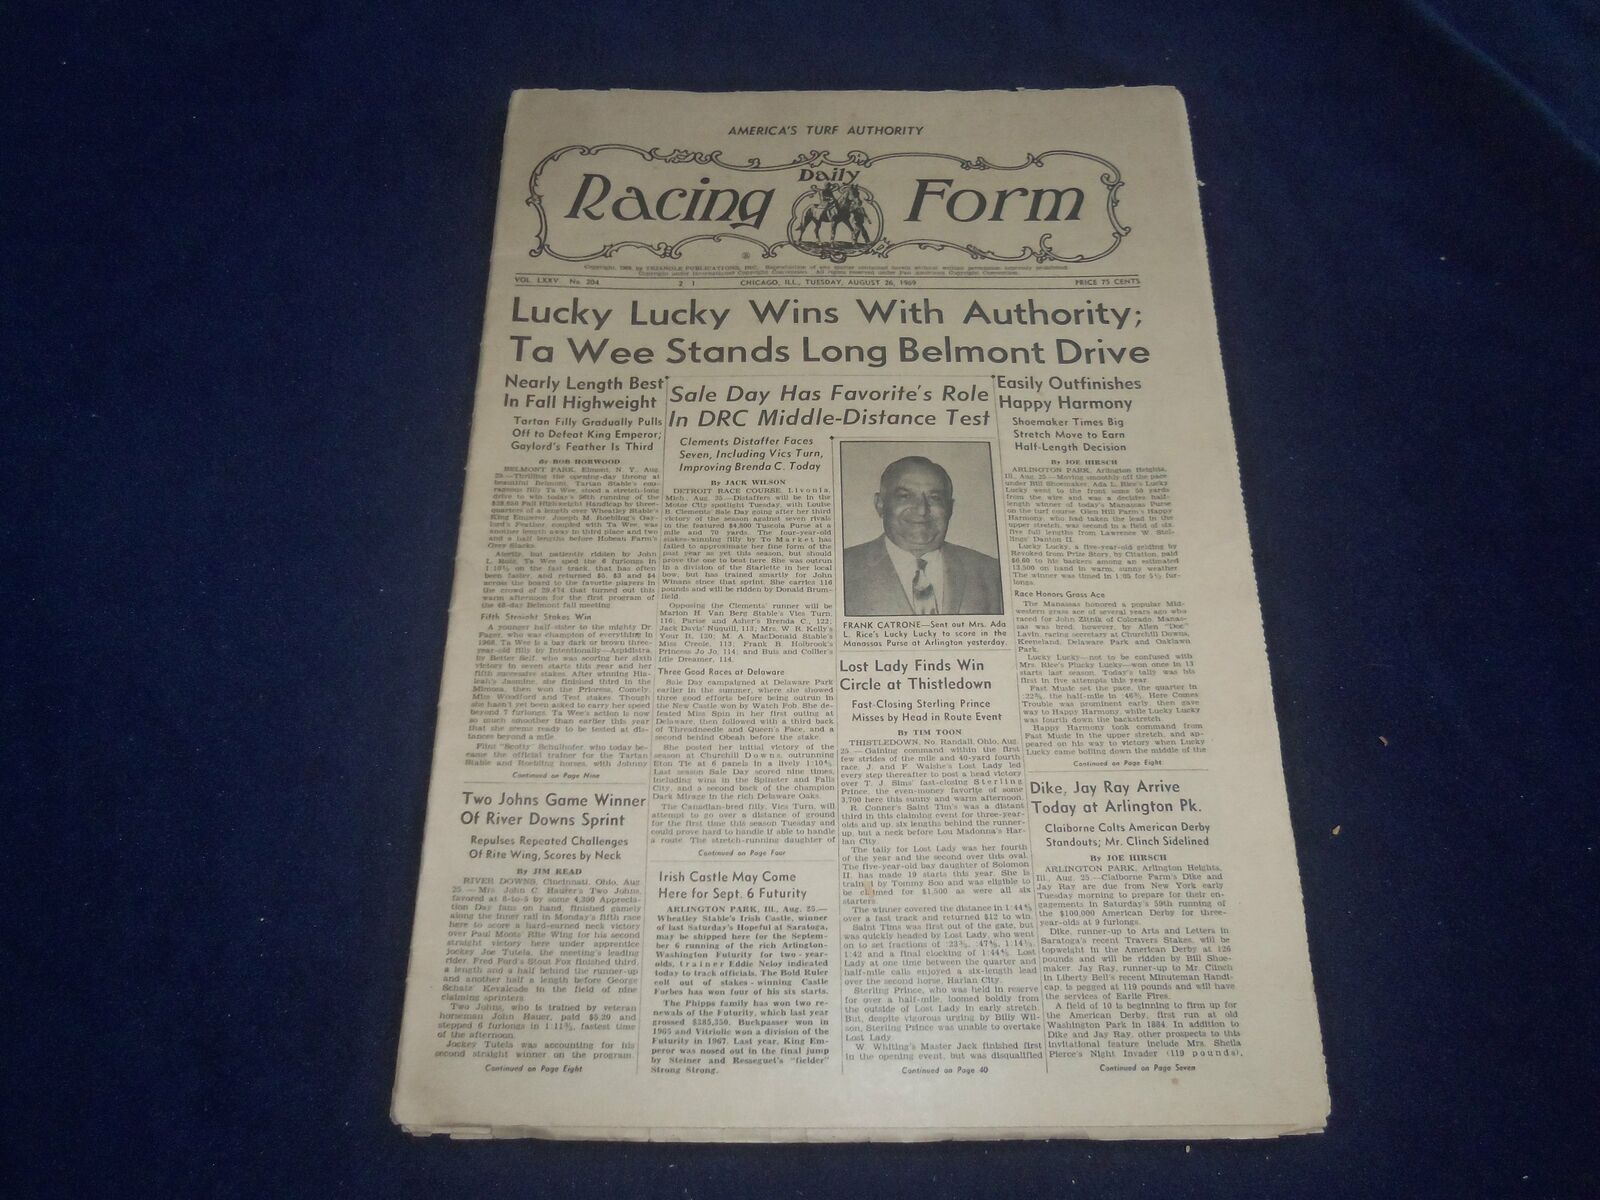 1969 AUGUST 26 THE DAILY RACING FORM - LUCKY LUCKY WINS WITH AUTHORITY - NP 5519